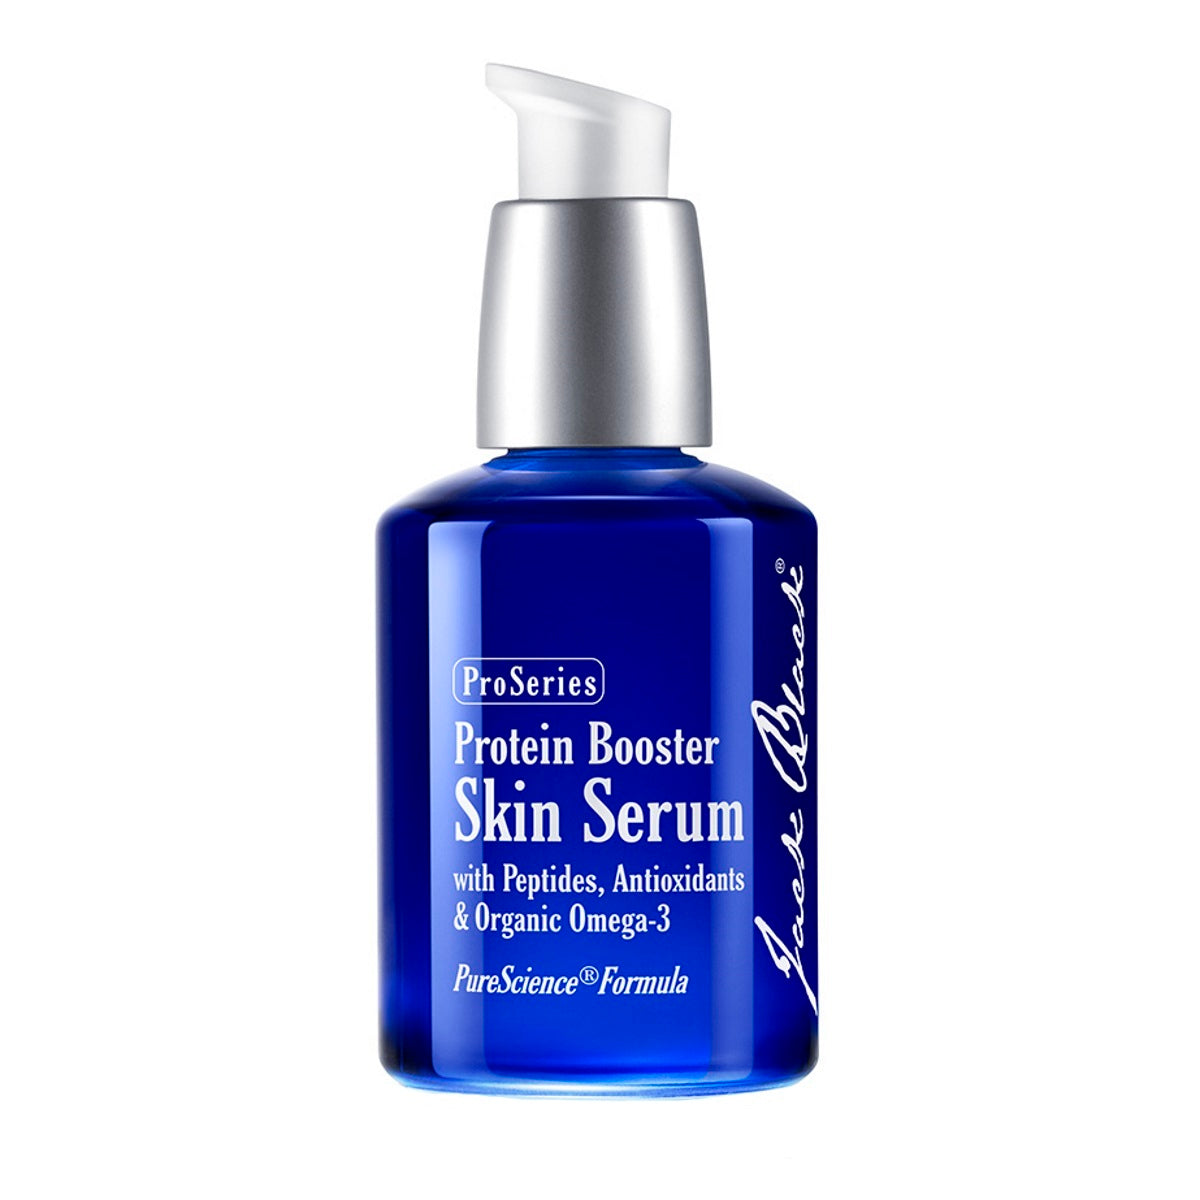 Primary image of Protein Booster Skin Serum